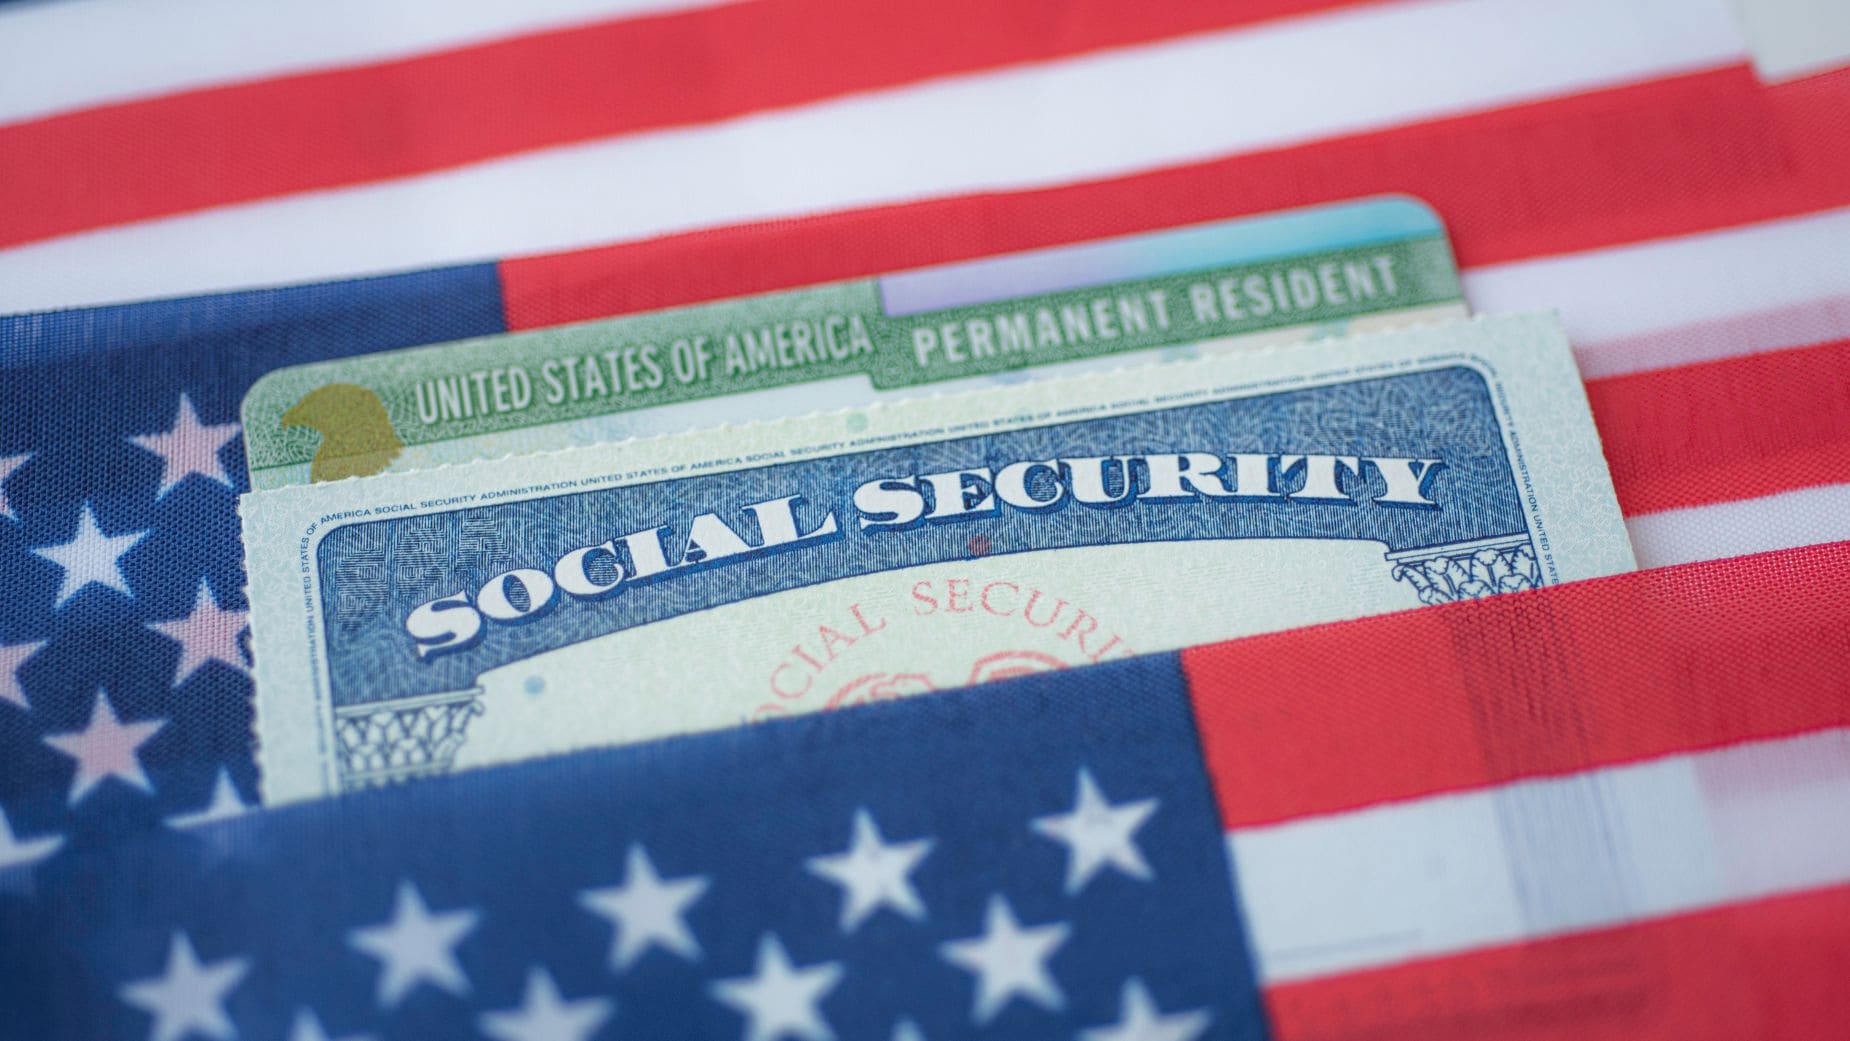 You will get earlier your Social Security payment if you meet the requirements